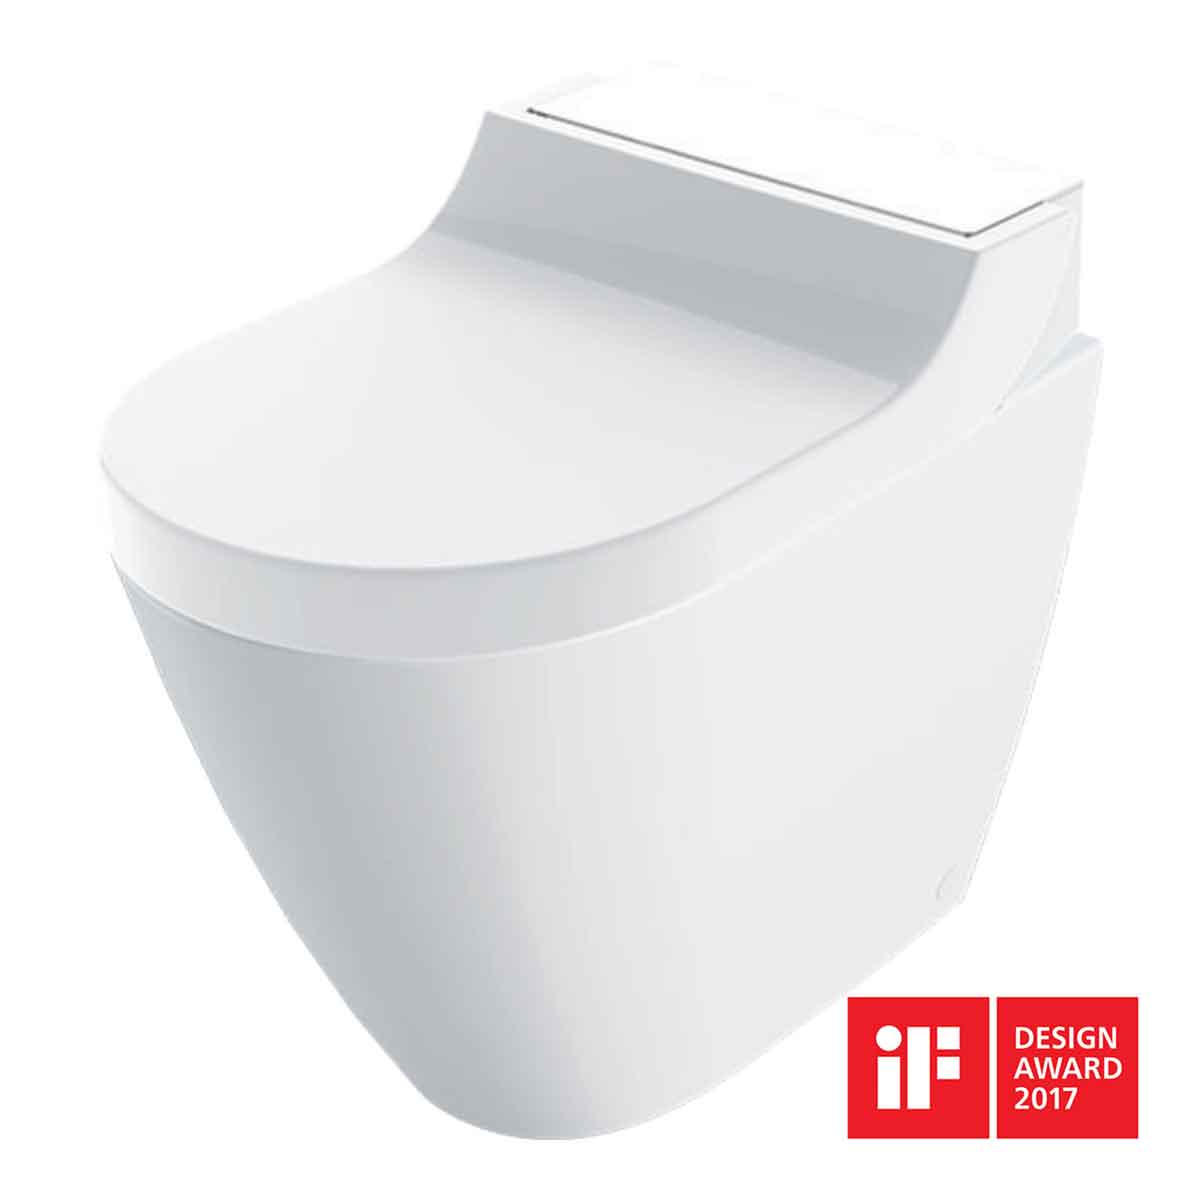 Geberit Aquaclean Tuma Classic Wc, Complete Solution Floor-standing, Back-to-wall: White Alpine